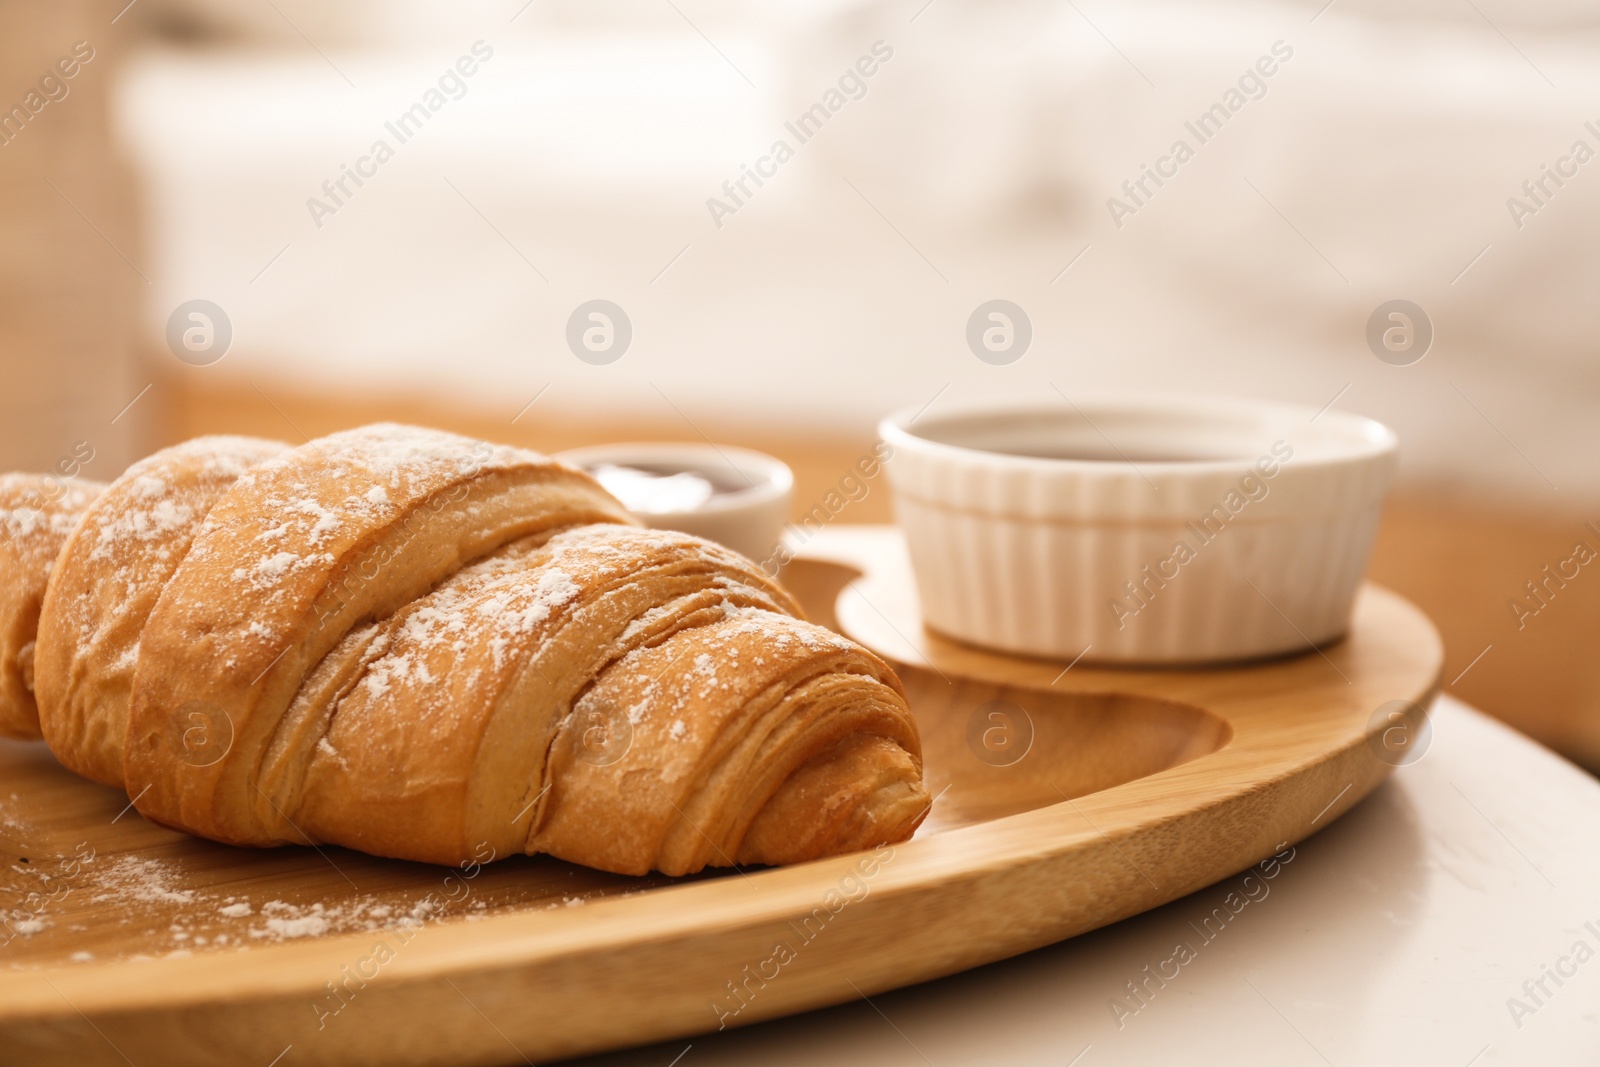 Photo of Delicious croissant and jam on table. Delicious morning meal